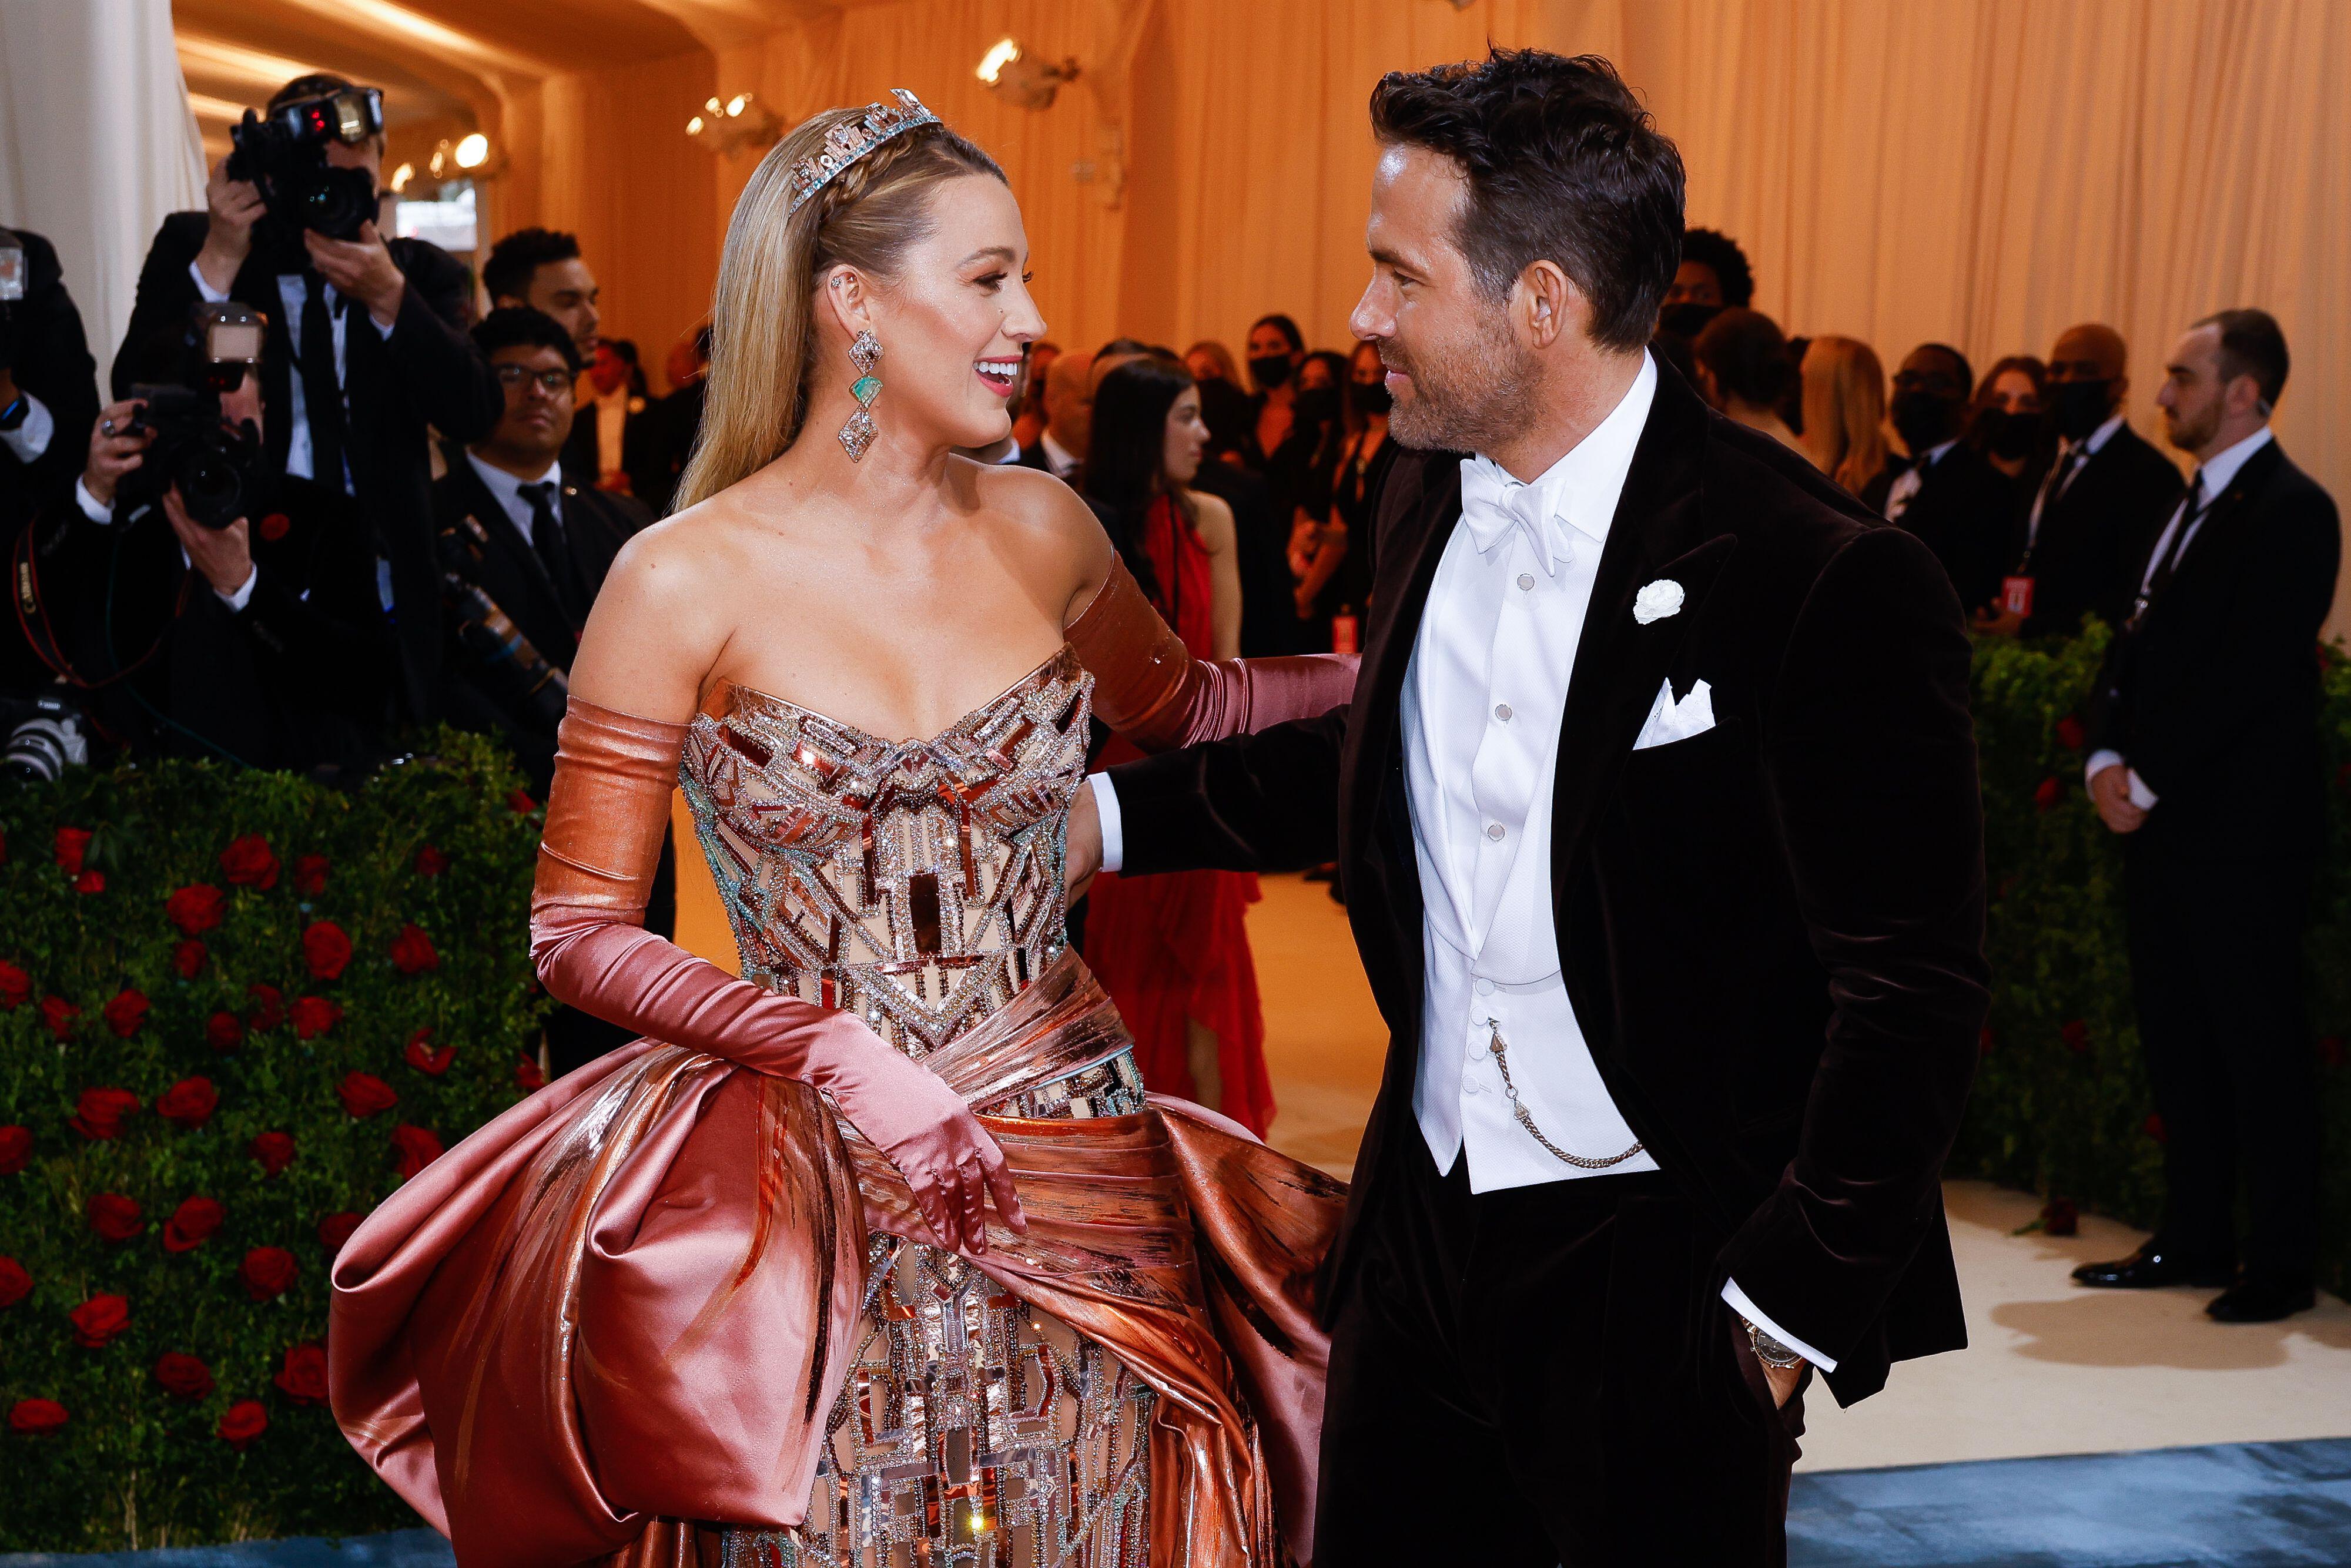 Blake Lively Shares Behind-the-Scenes Photos of Her Pre-Met Gala Dress